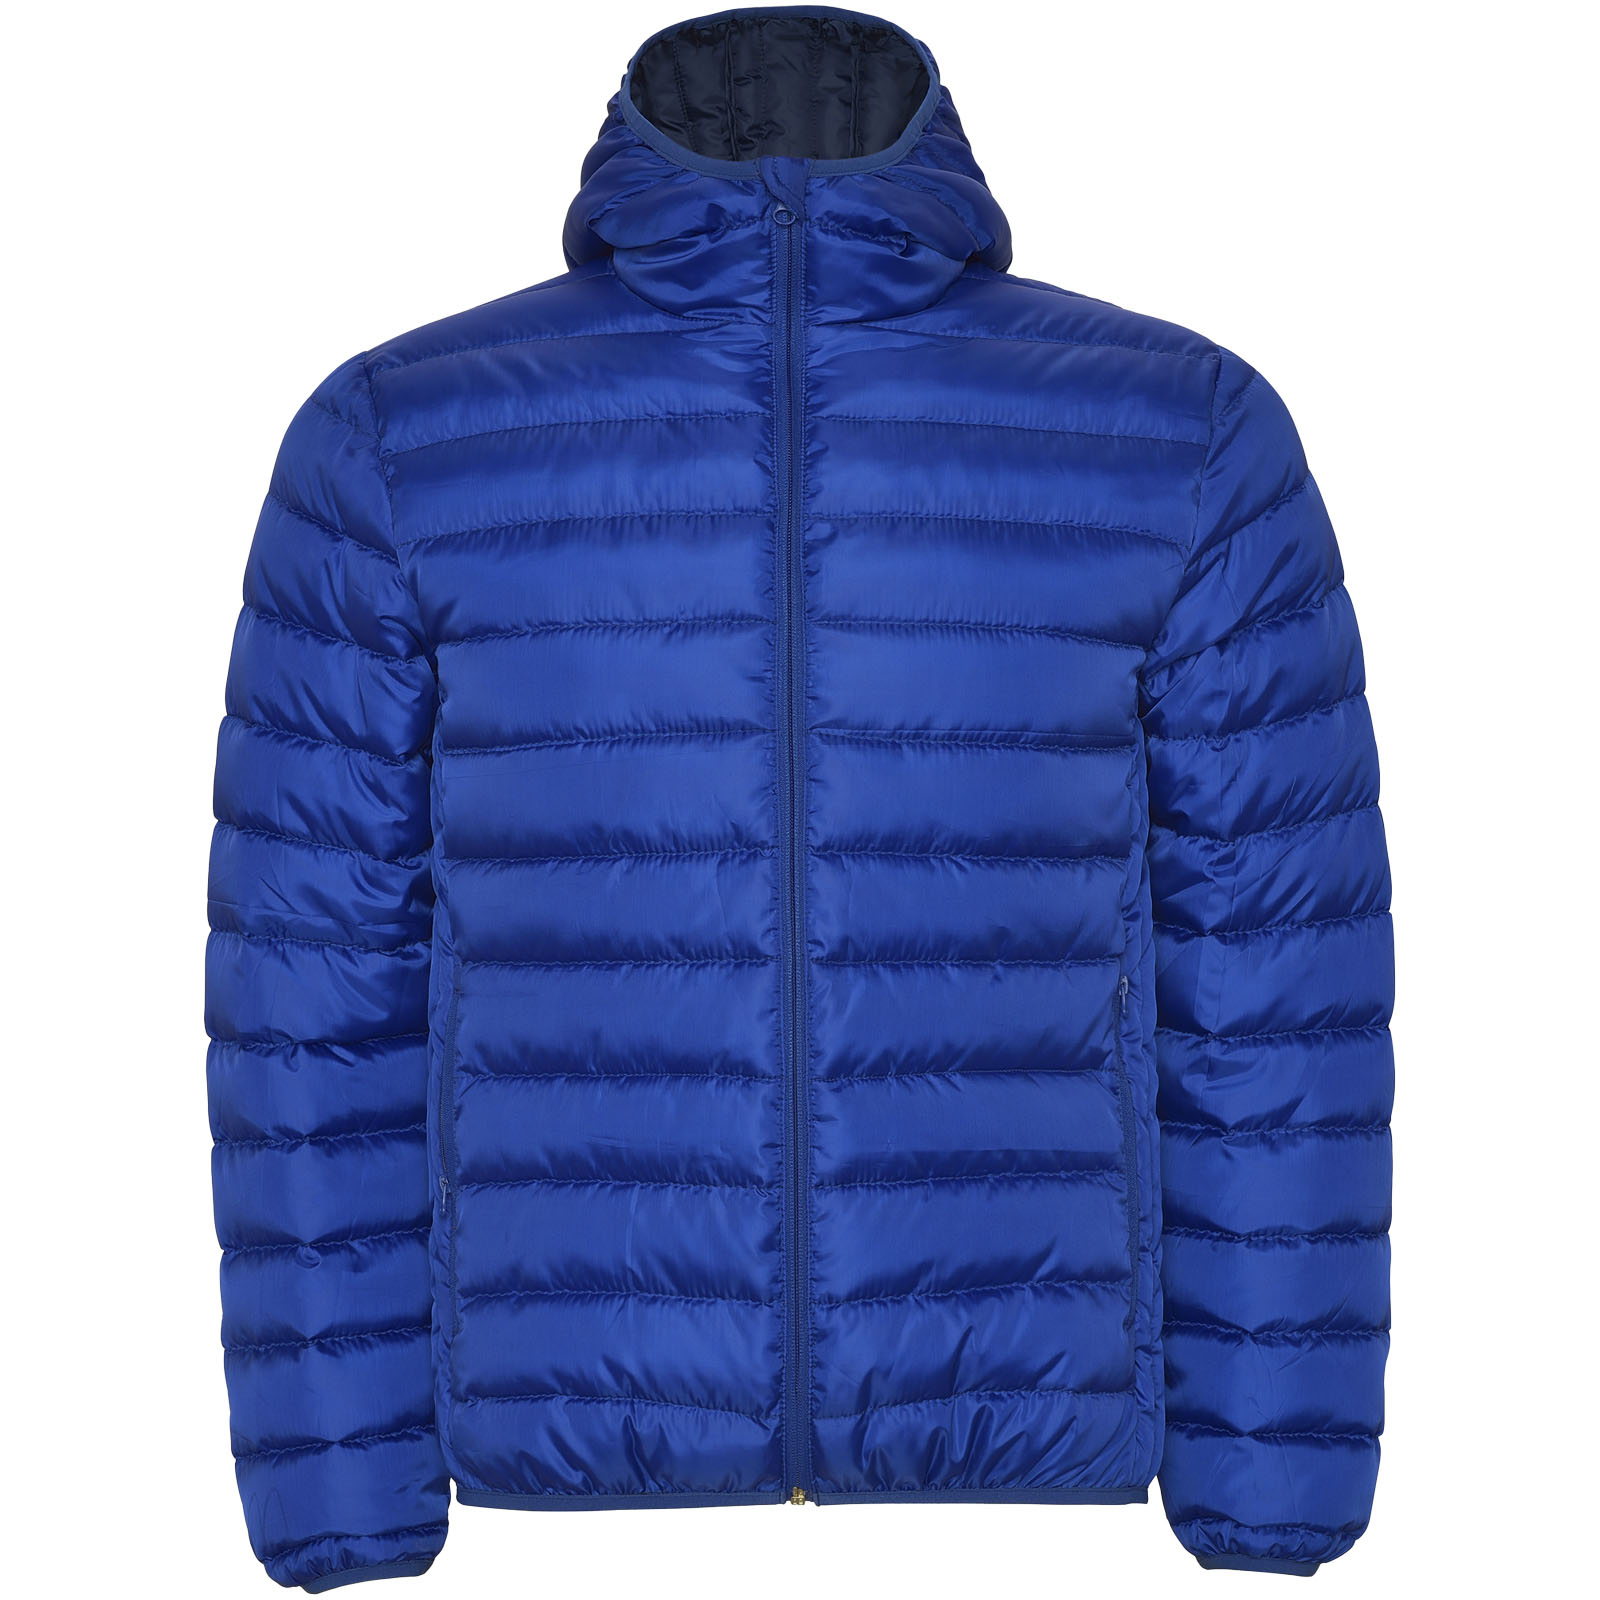 Advertising Jackets - Norway men's insulated jacket